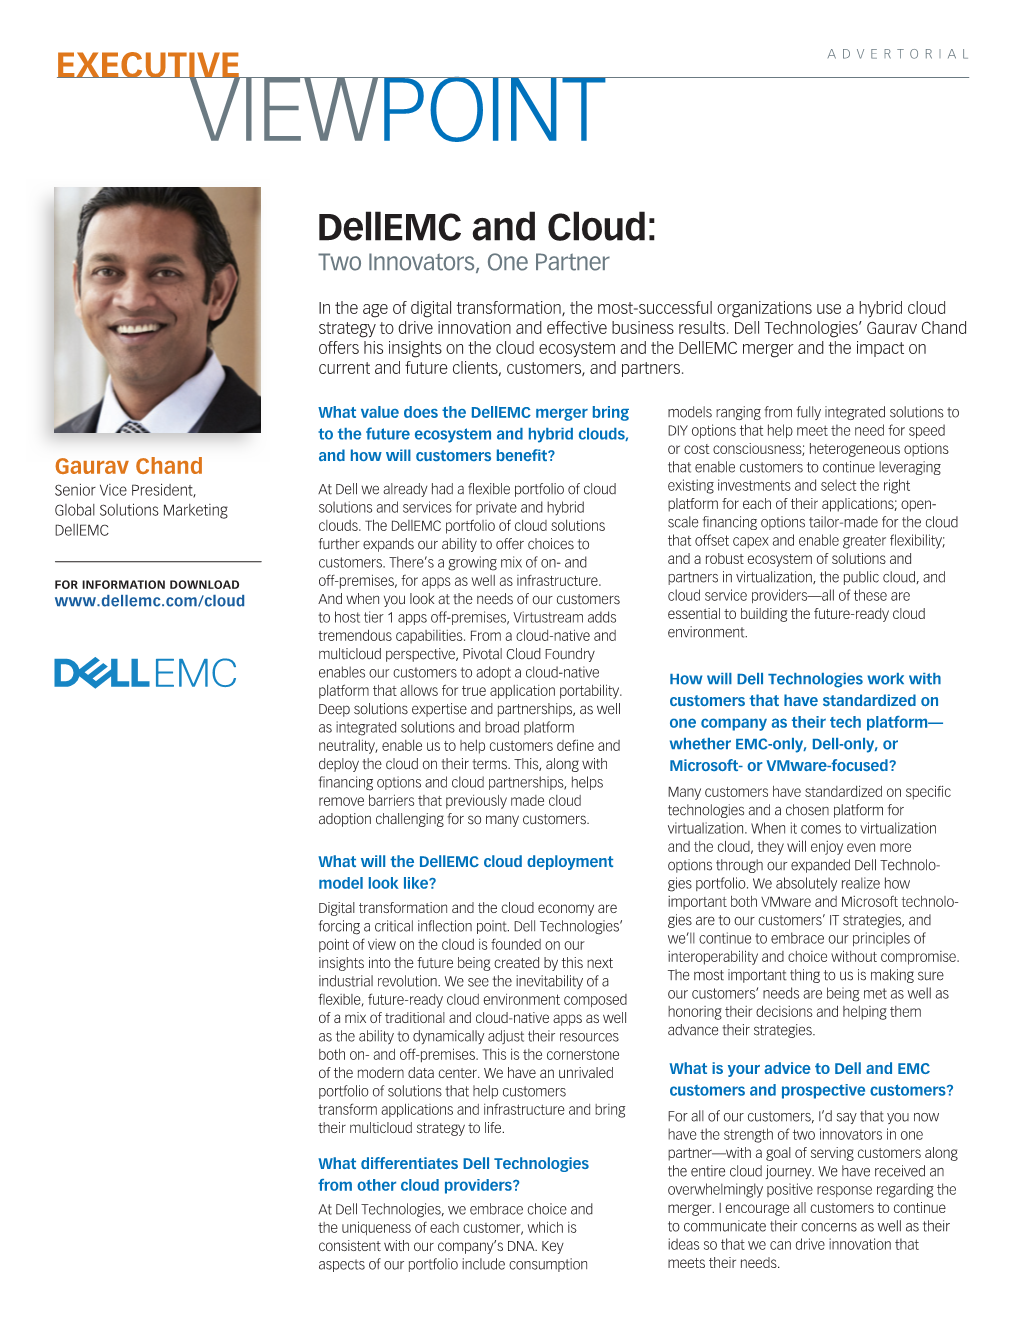 Dellemc and Cloud: Two Innovators, One Partner